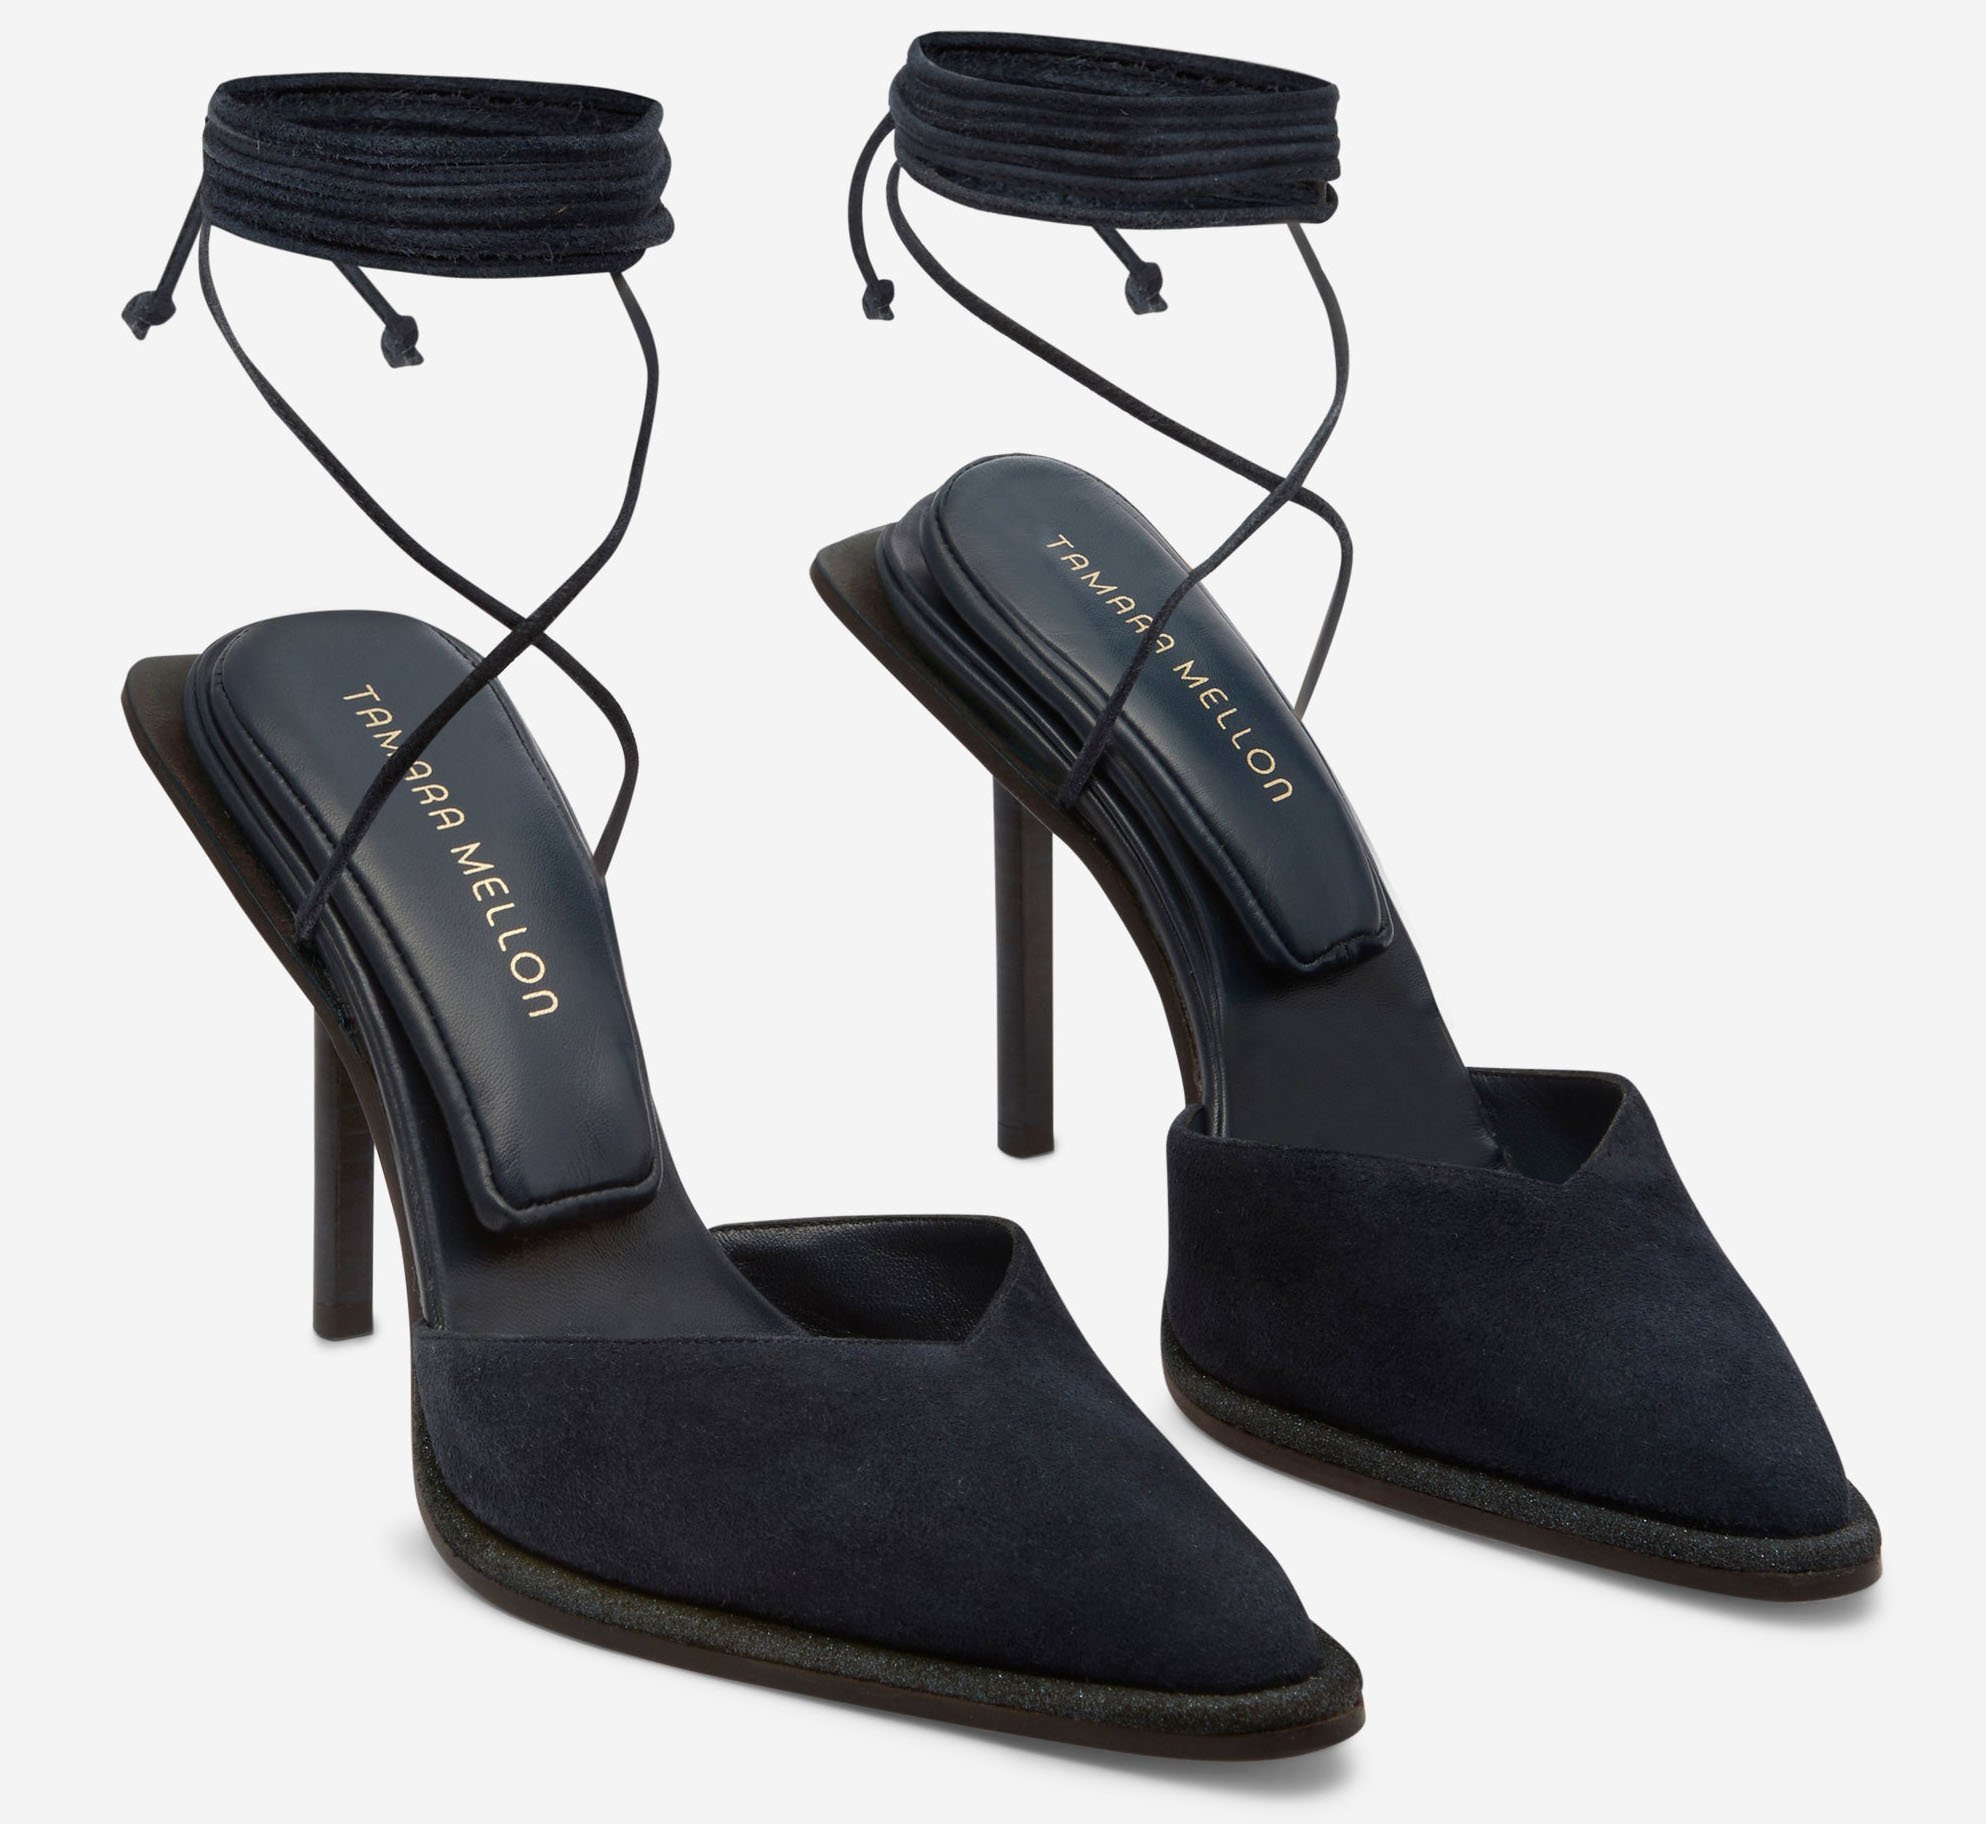 The Tamara Mellon Comet pumps feature a suede upper with glittery welt, a pillow top insole, wraparound straps, and high heels